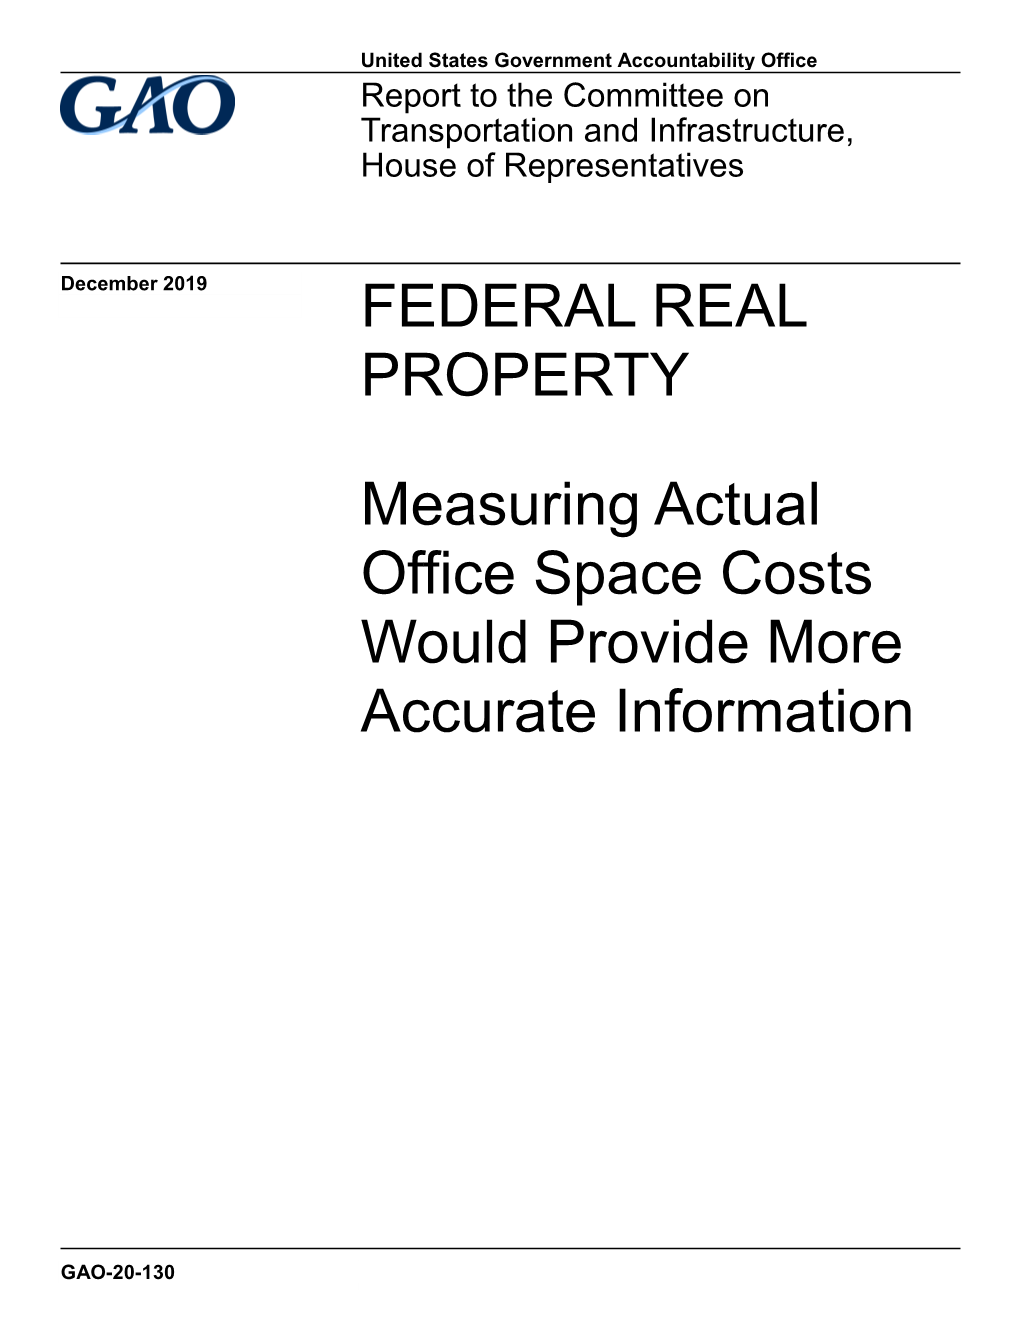 GAO-20-130, FEDERAL REAL PROPERTY: Measuring Actual